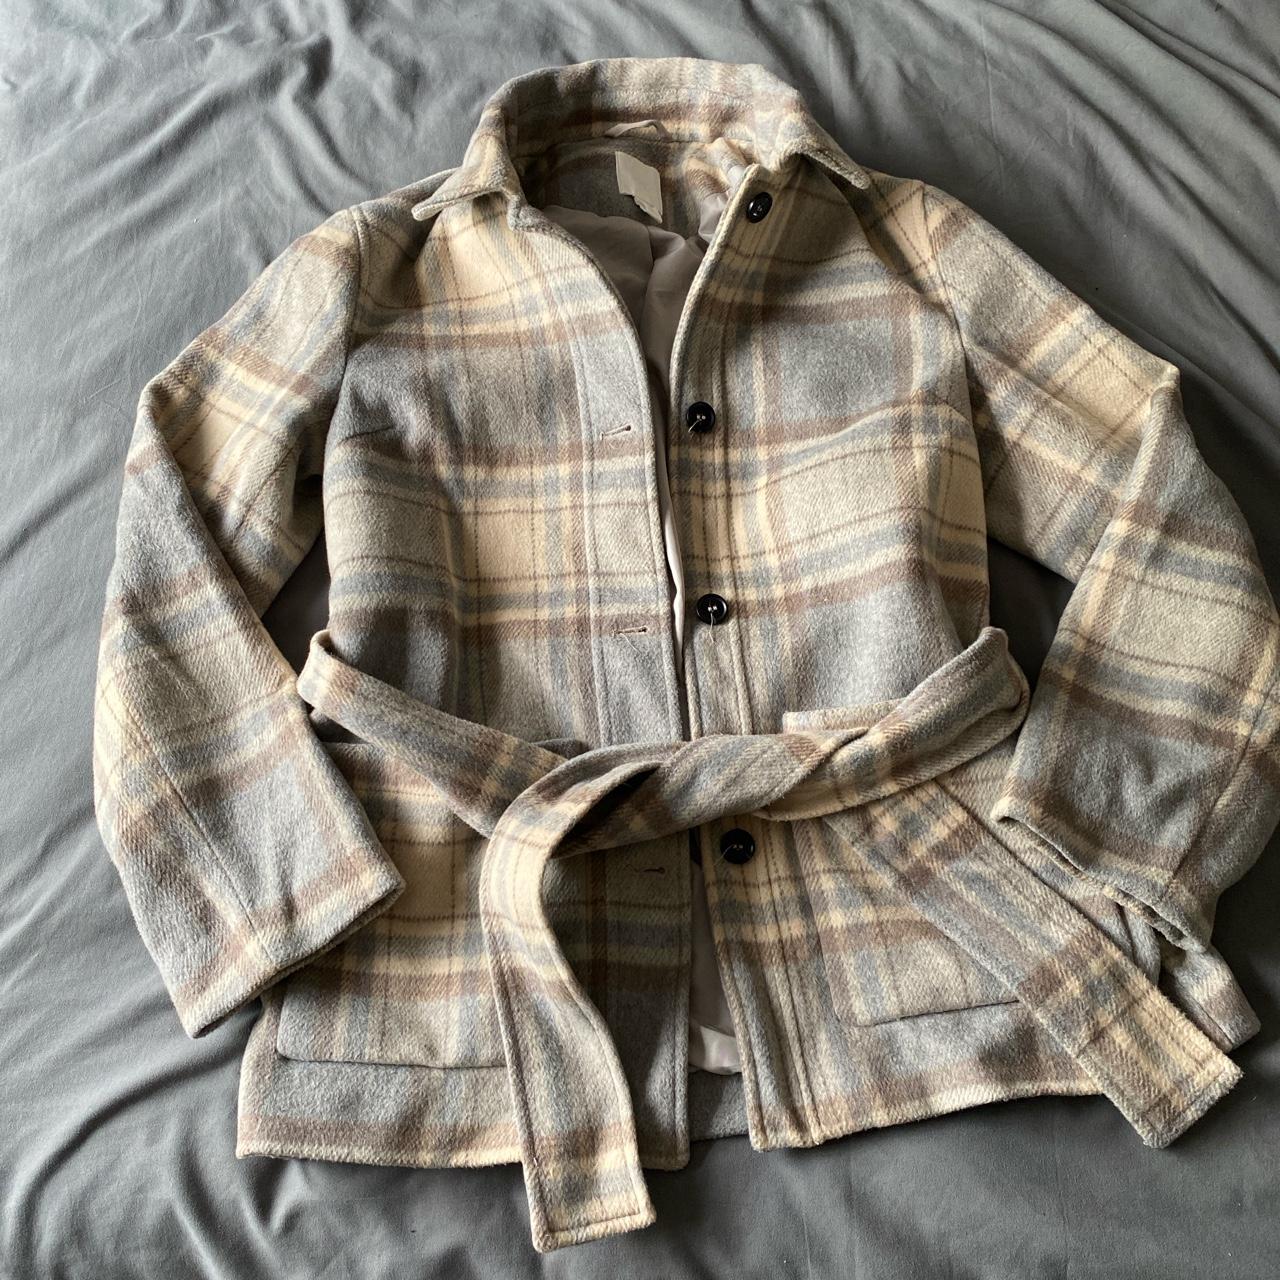 H&M check jacket with tie belt, woven fabric with a... - Depop